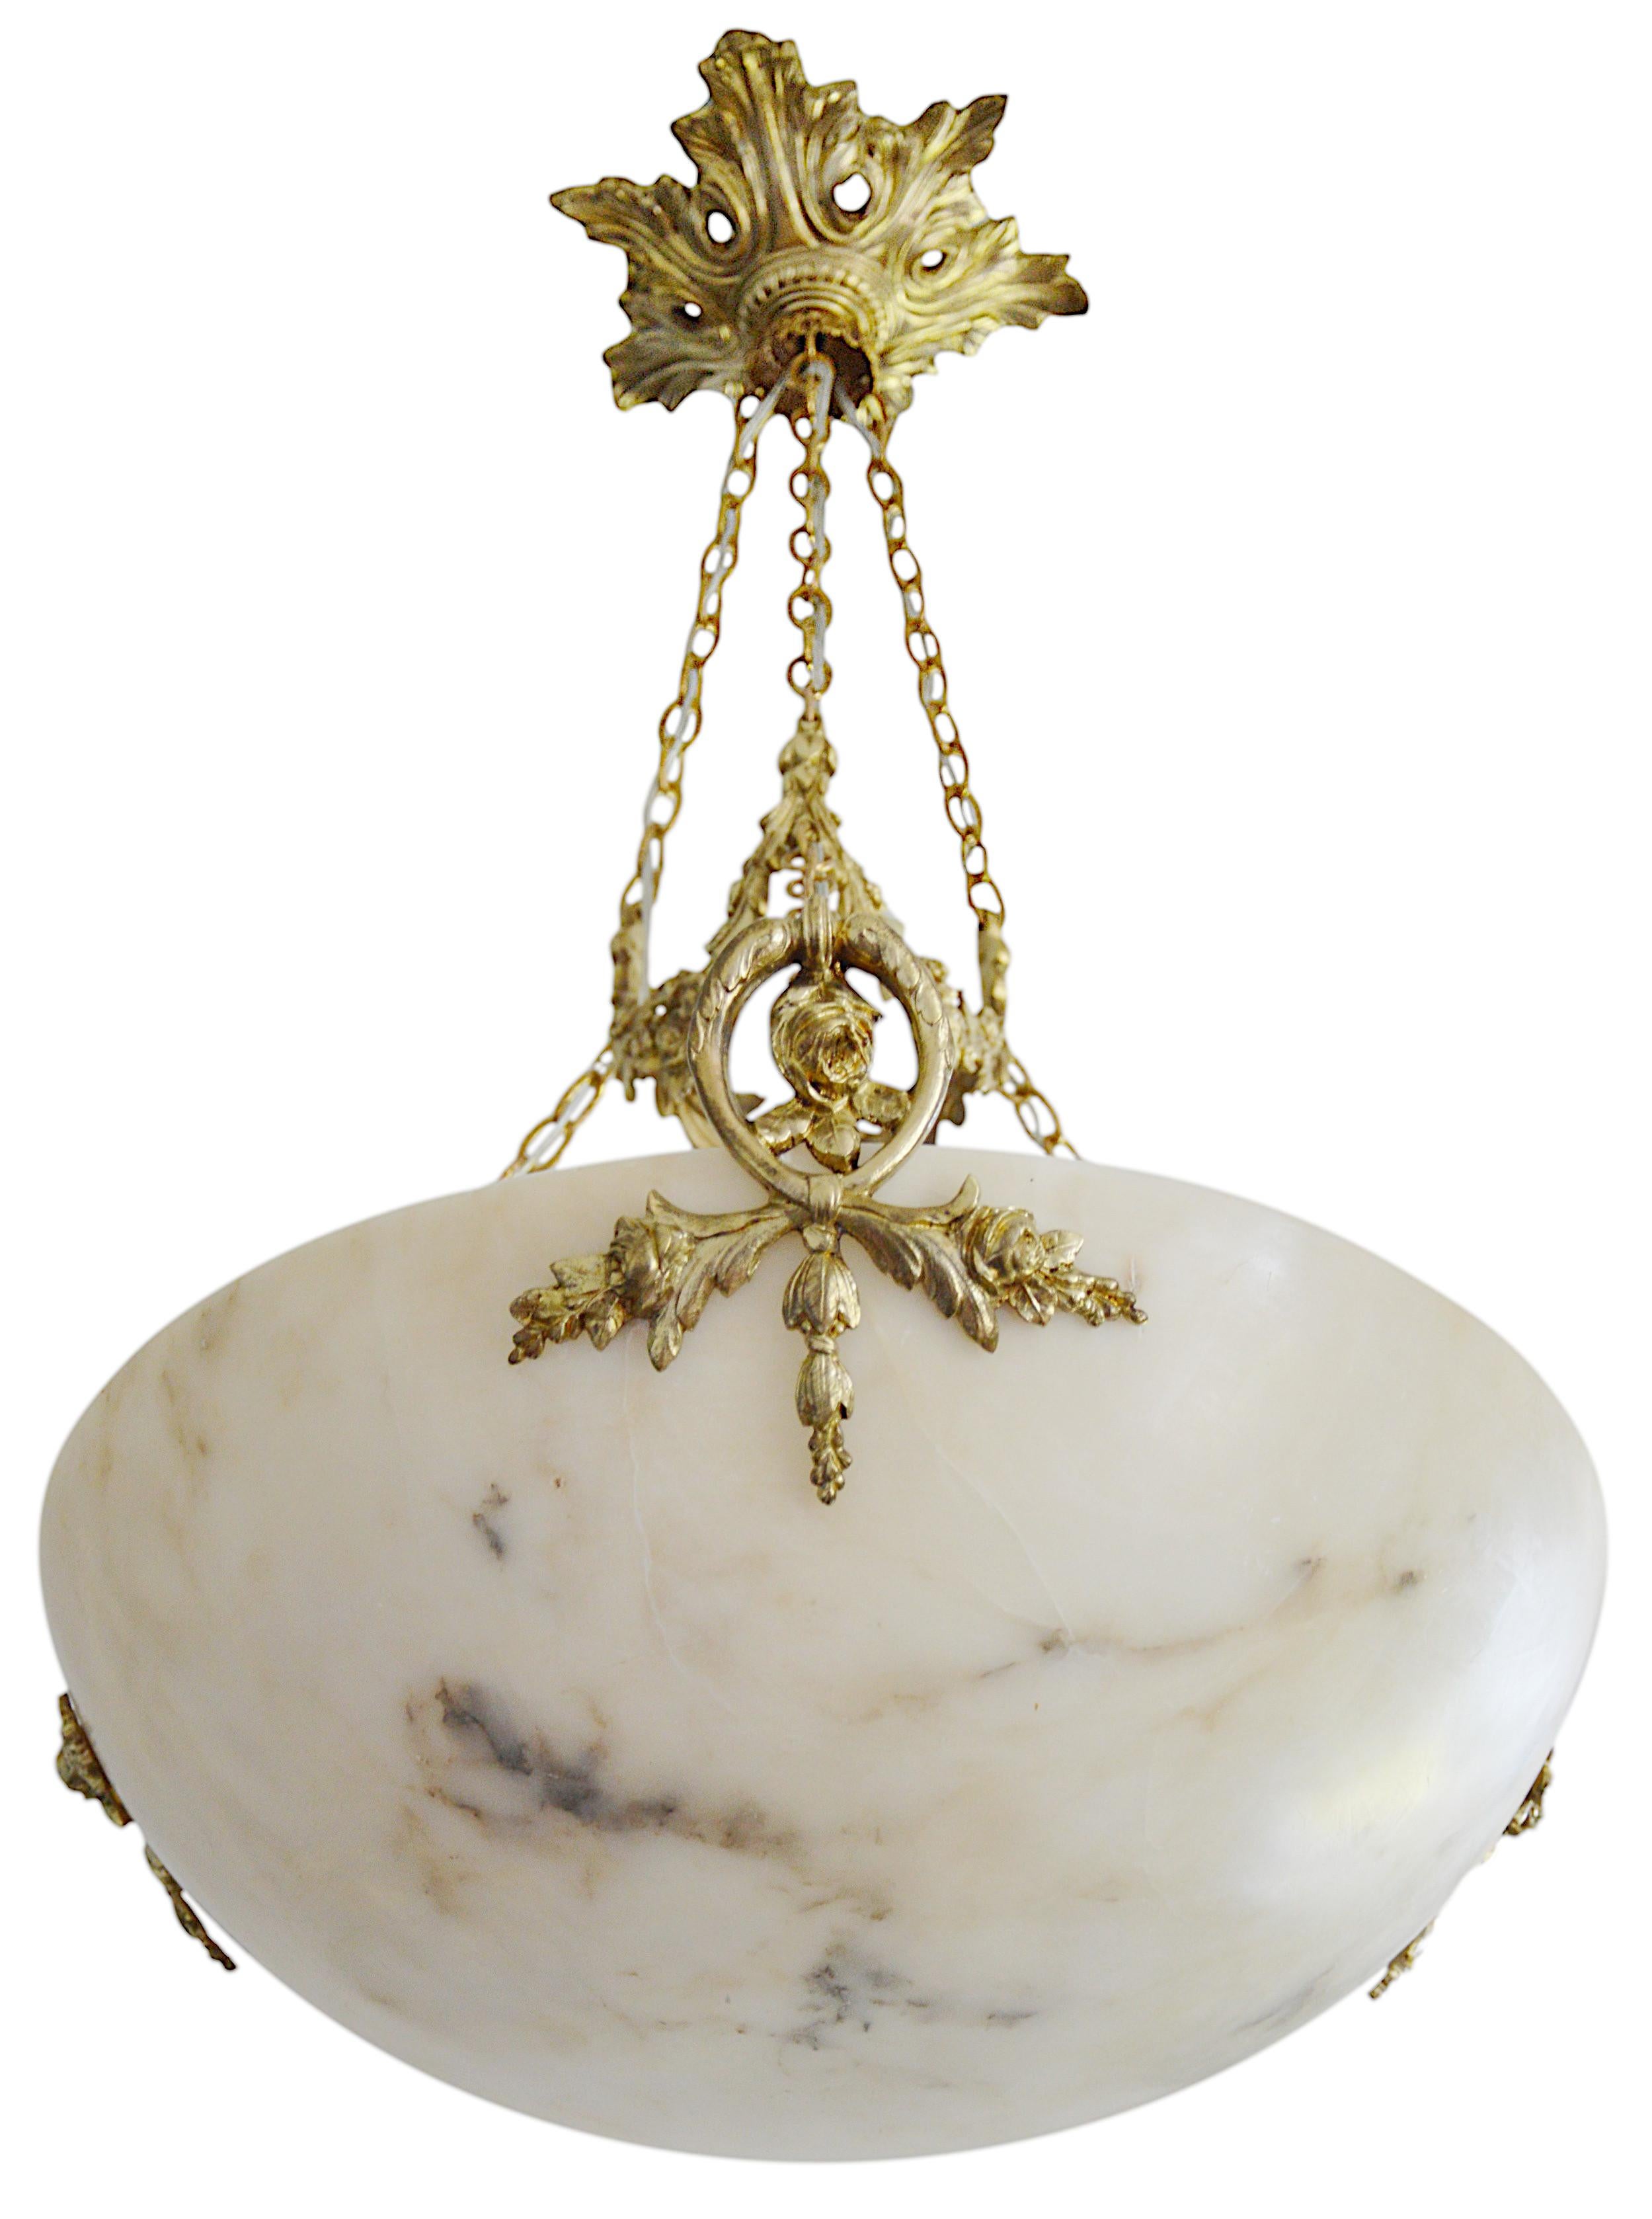 French Art Deco alabaster and bronze pendant chandelier, France, ca.1920. Alabaster shade hung at its bronze fixture. Old alabaster cannot be compared to new ones. Old alabaster has veins. Sometimes they can be mistaken for cracks. But they are not